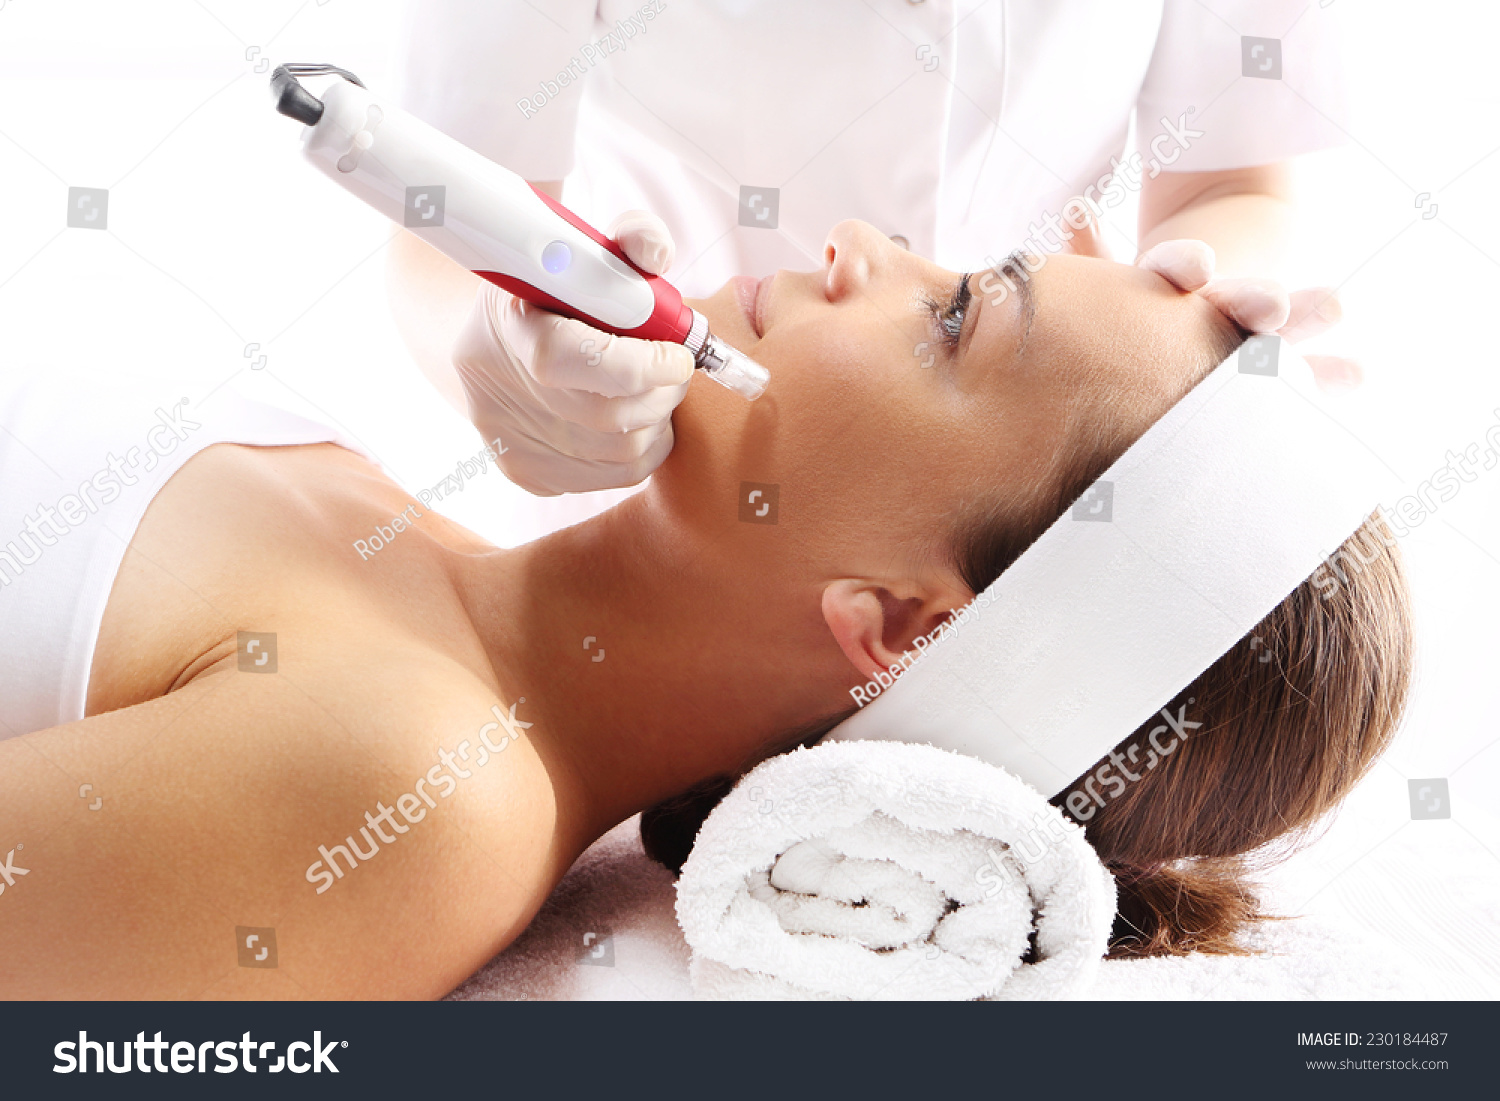 Needle mesotherapy.Beautician performs a needle mesotherapy treatment on a woman's face #230184487